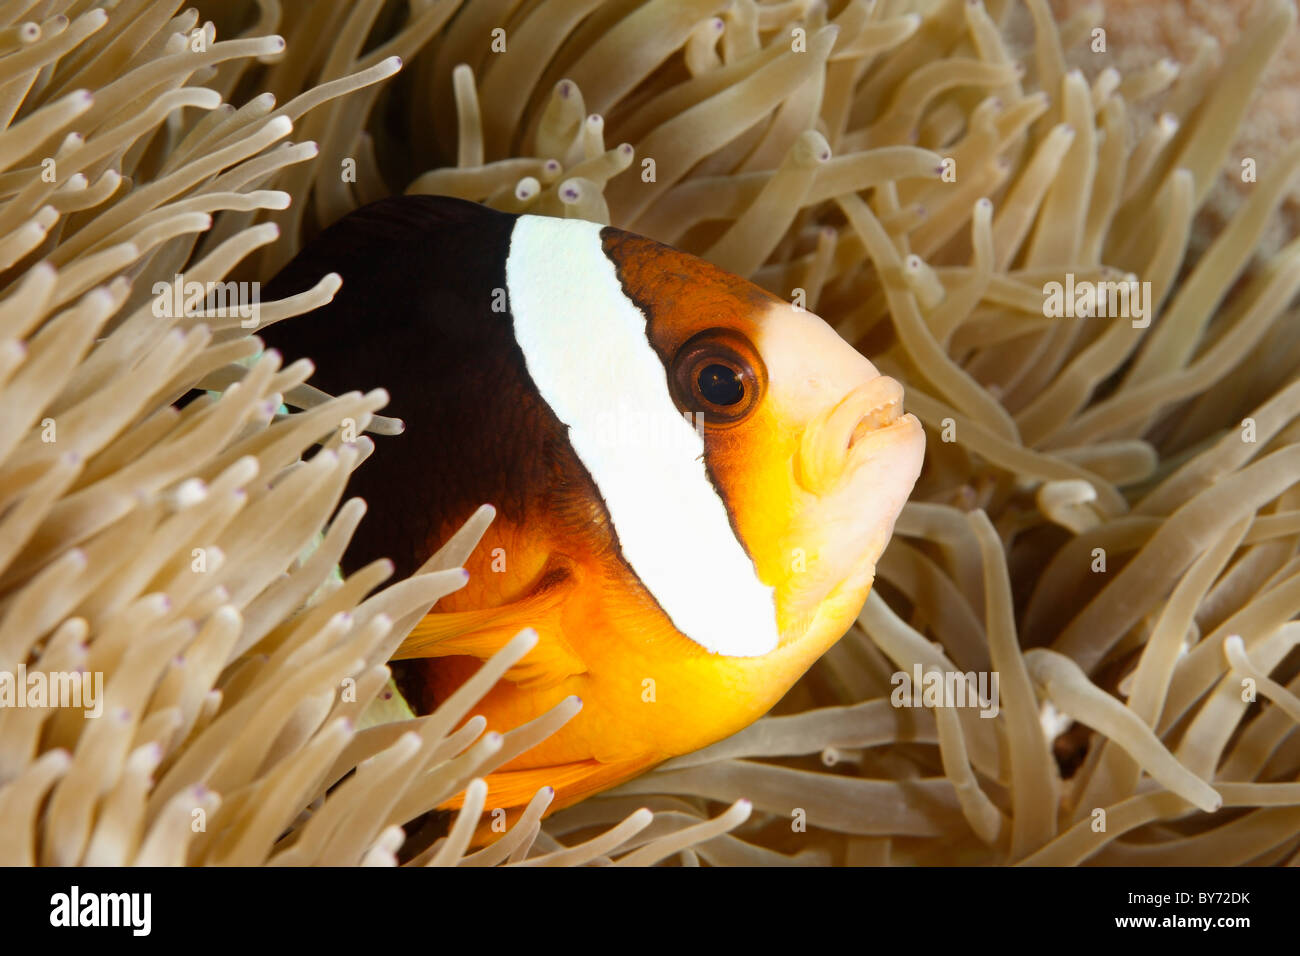 an orange-finned anemonefish living in the tentacles of its anemone, Tulamben, Bali, Indonesia Stock Photo